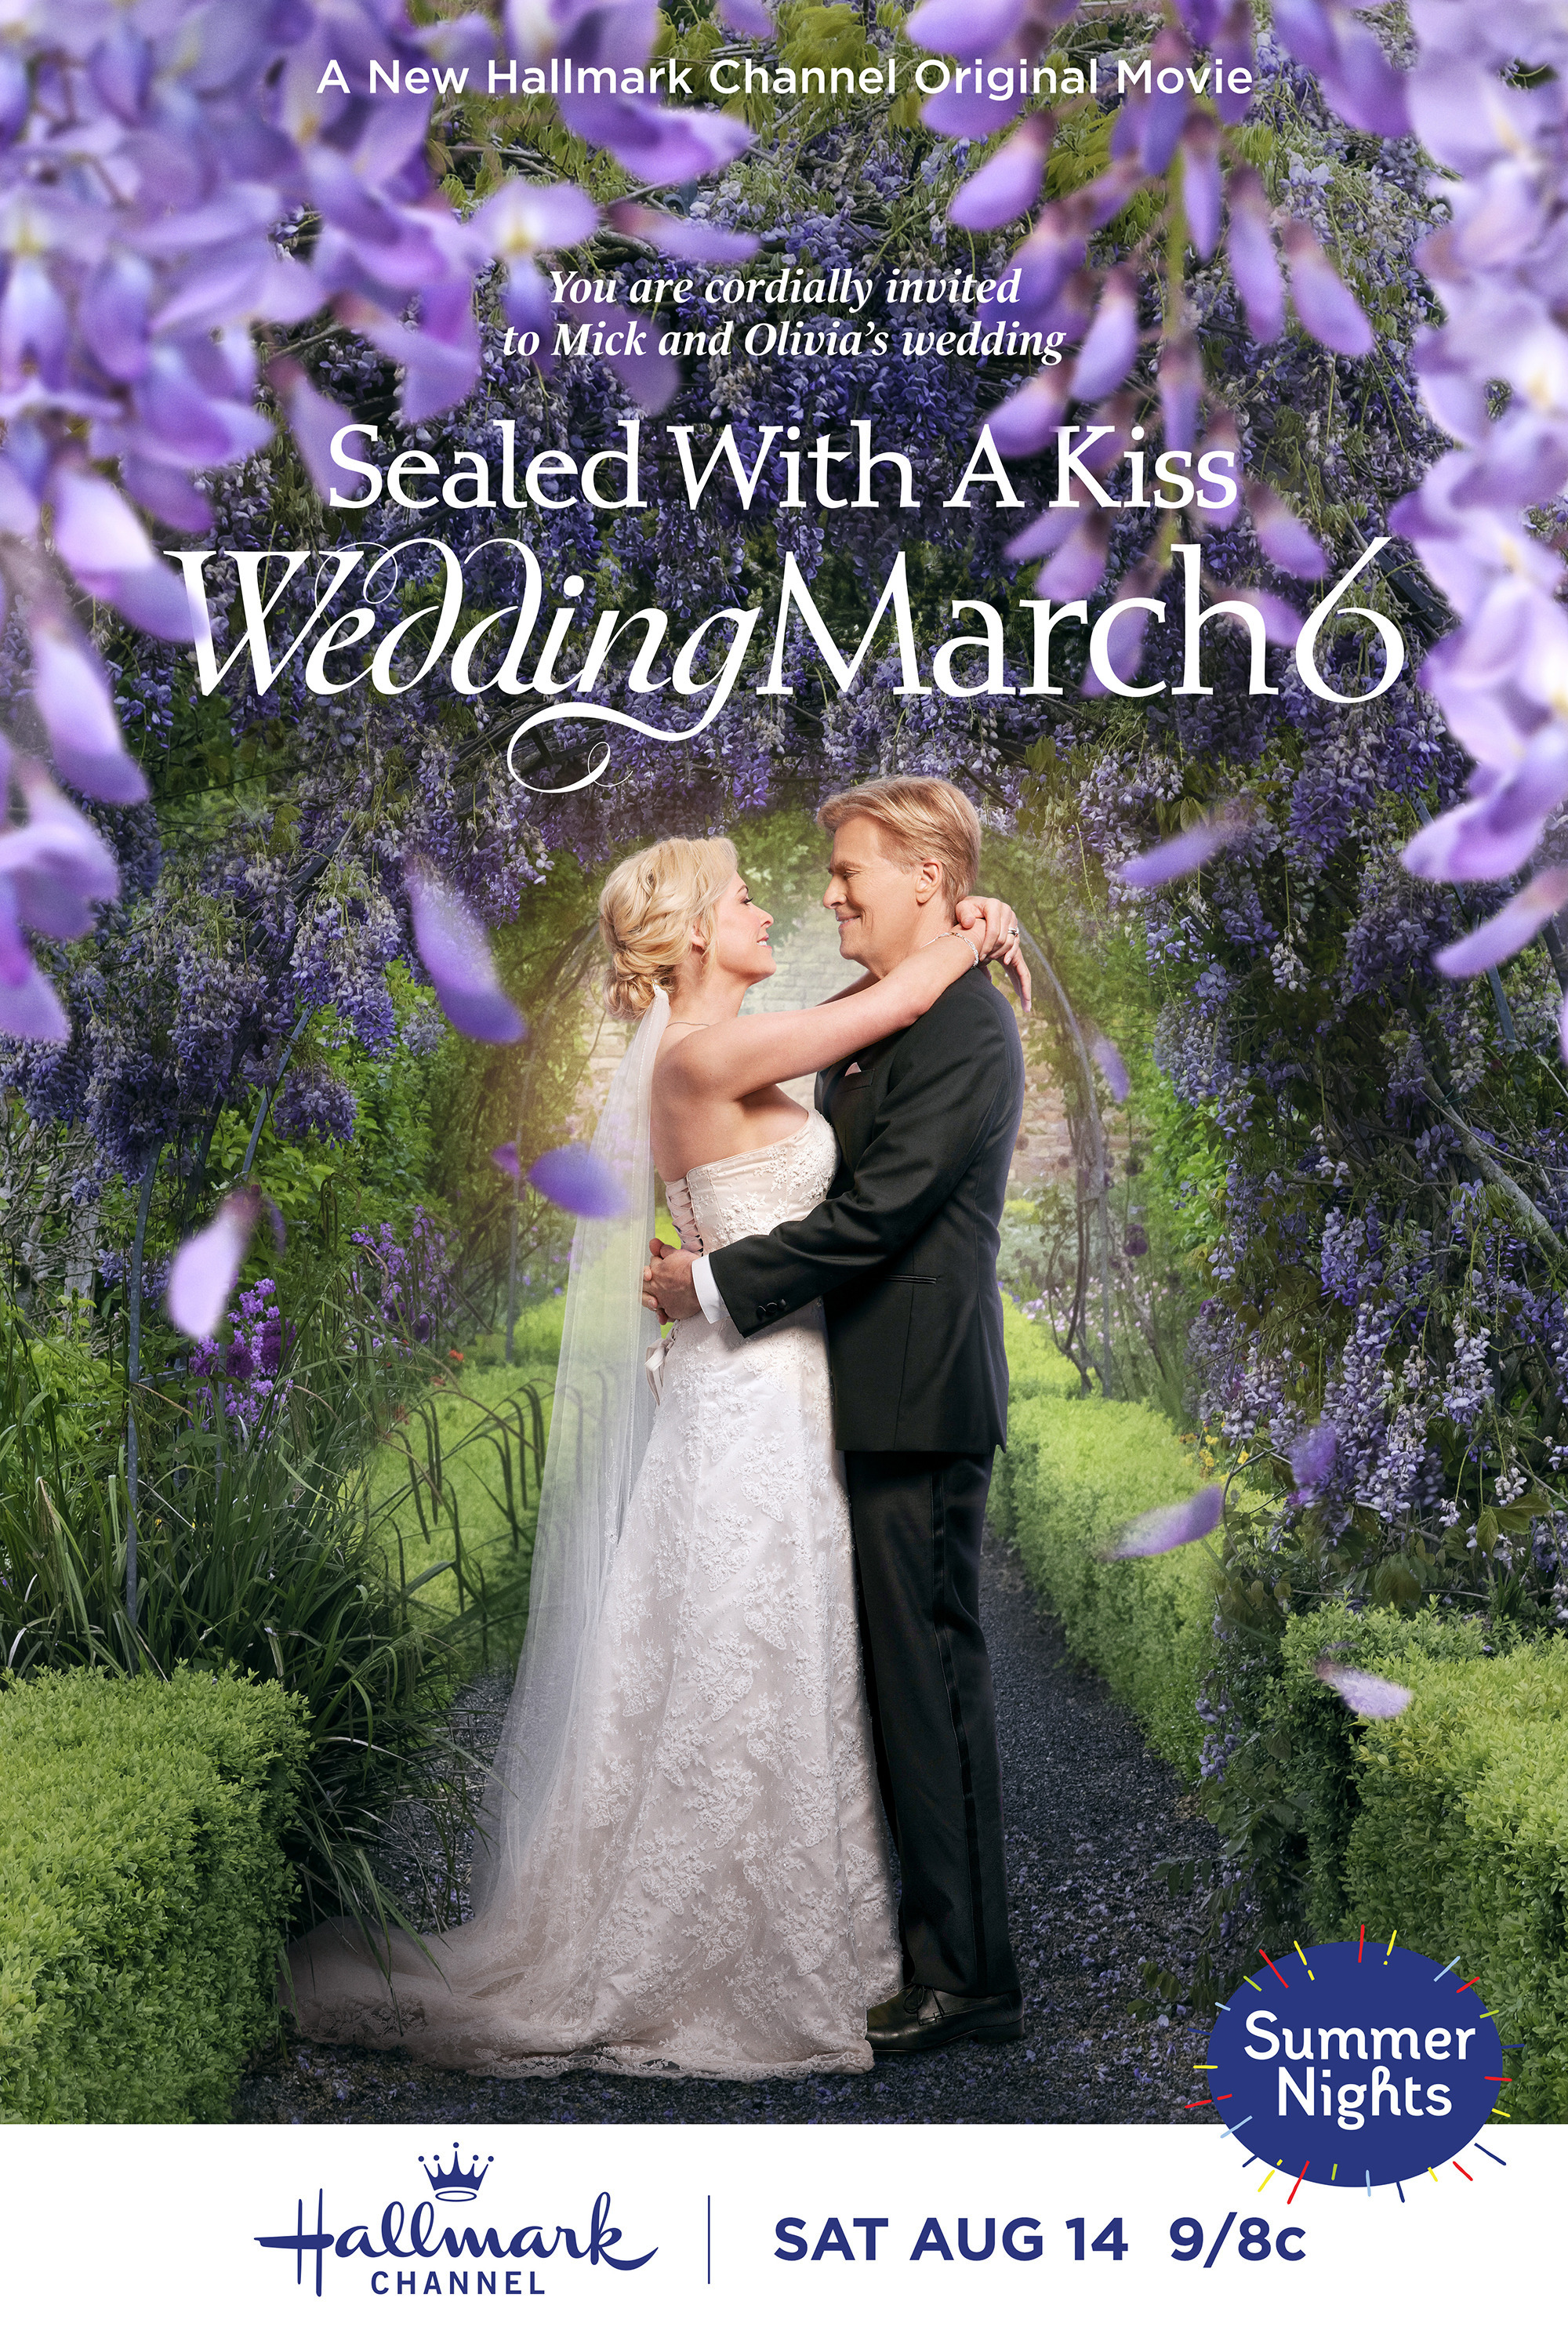 Mega Sized TV Poster Image for Sealed with a Kiss: Wedding March 6 